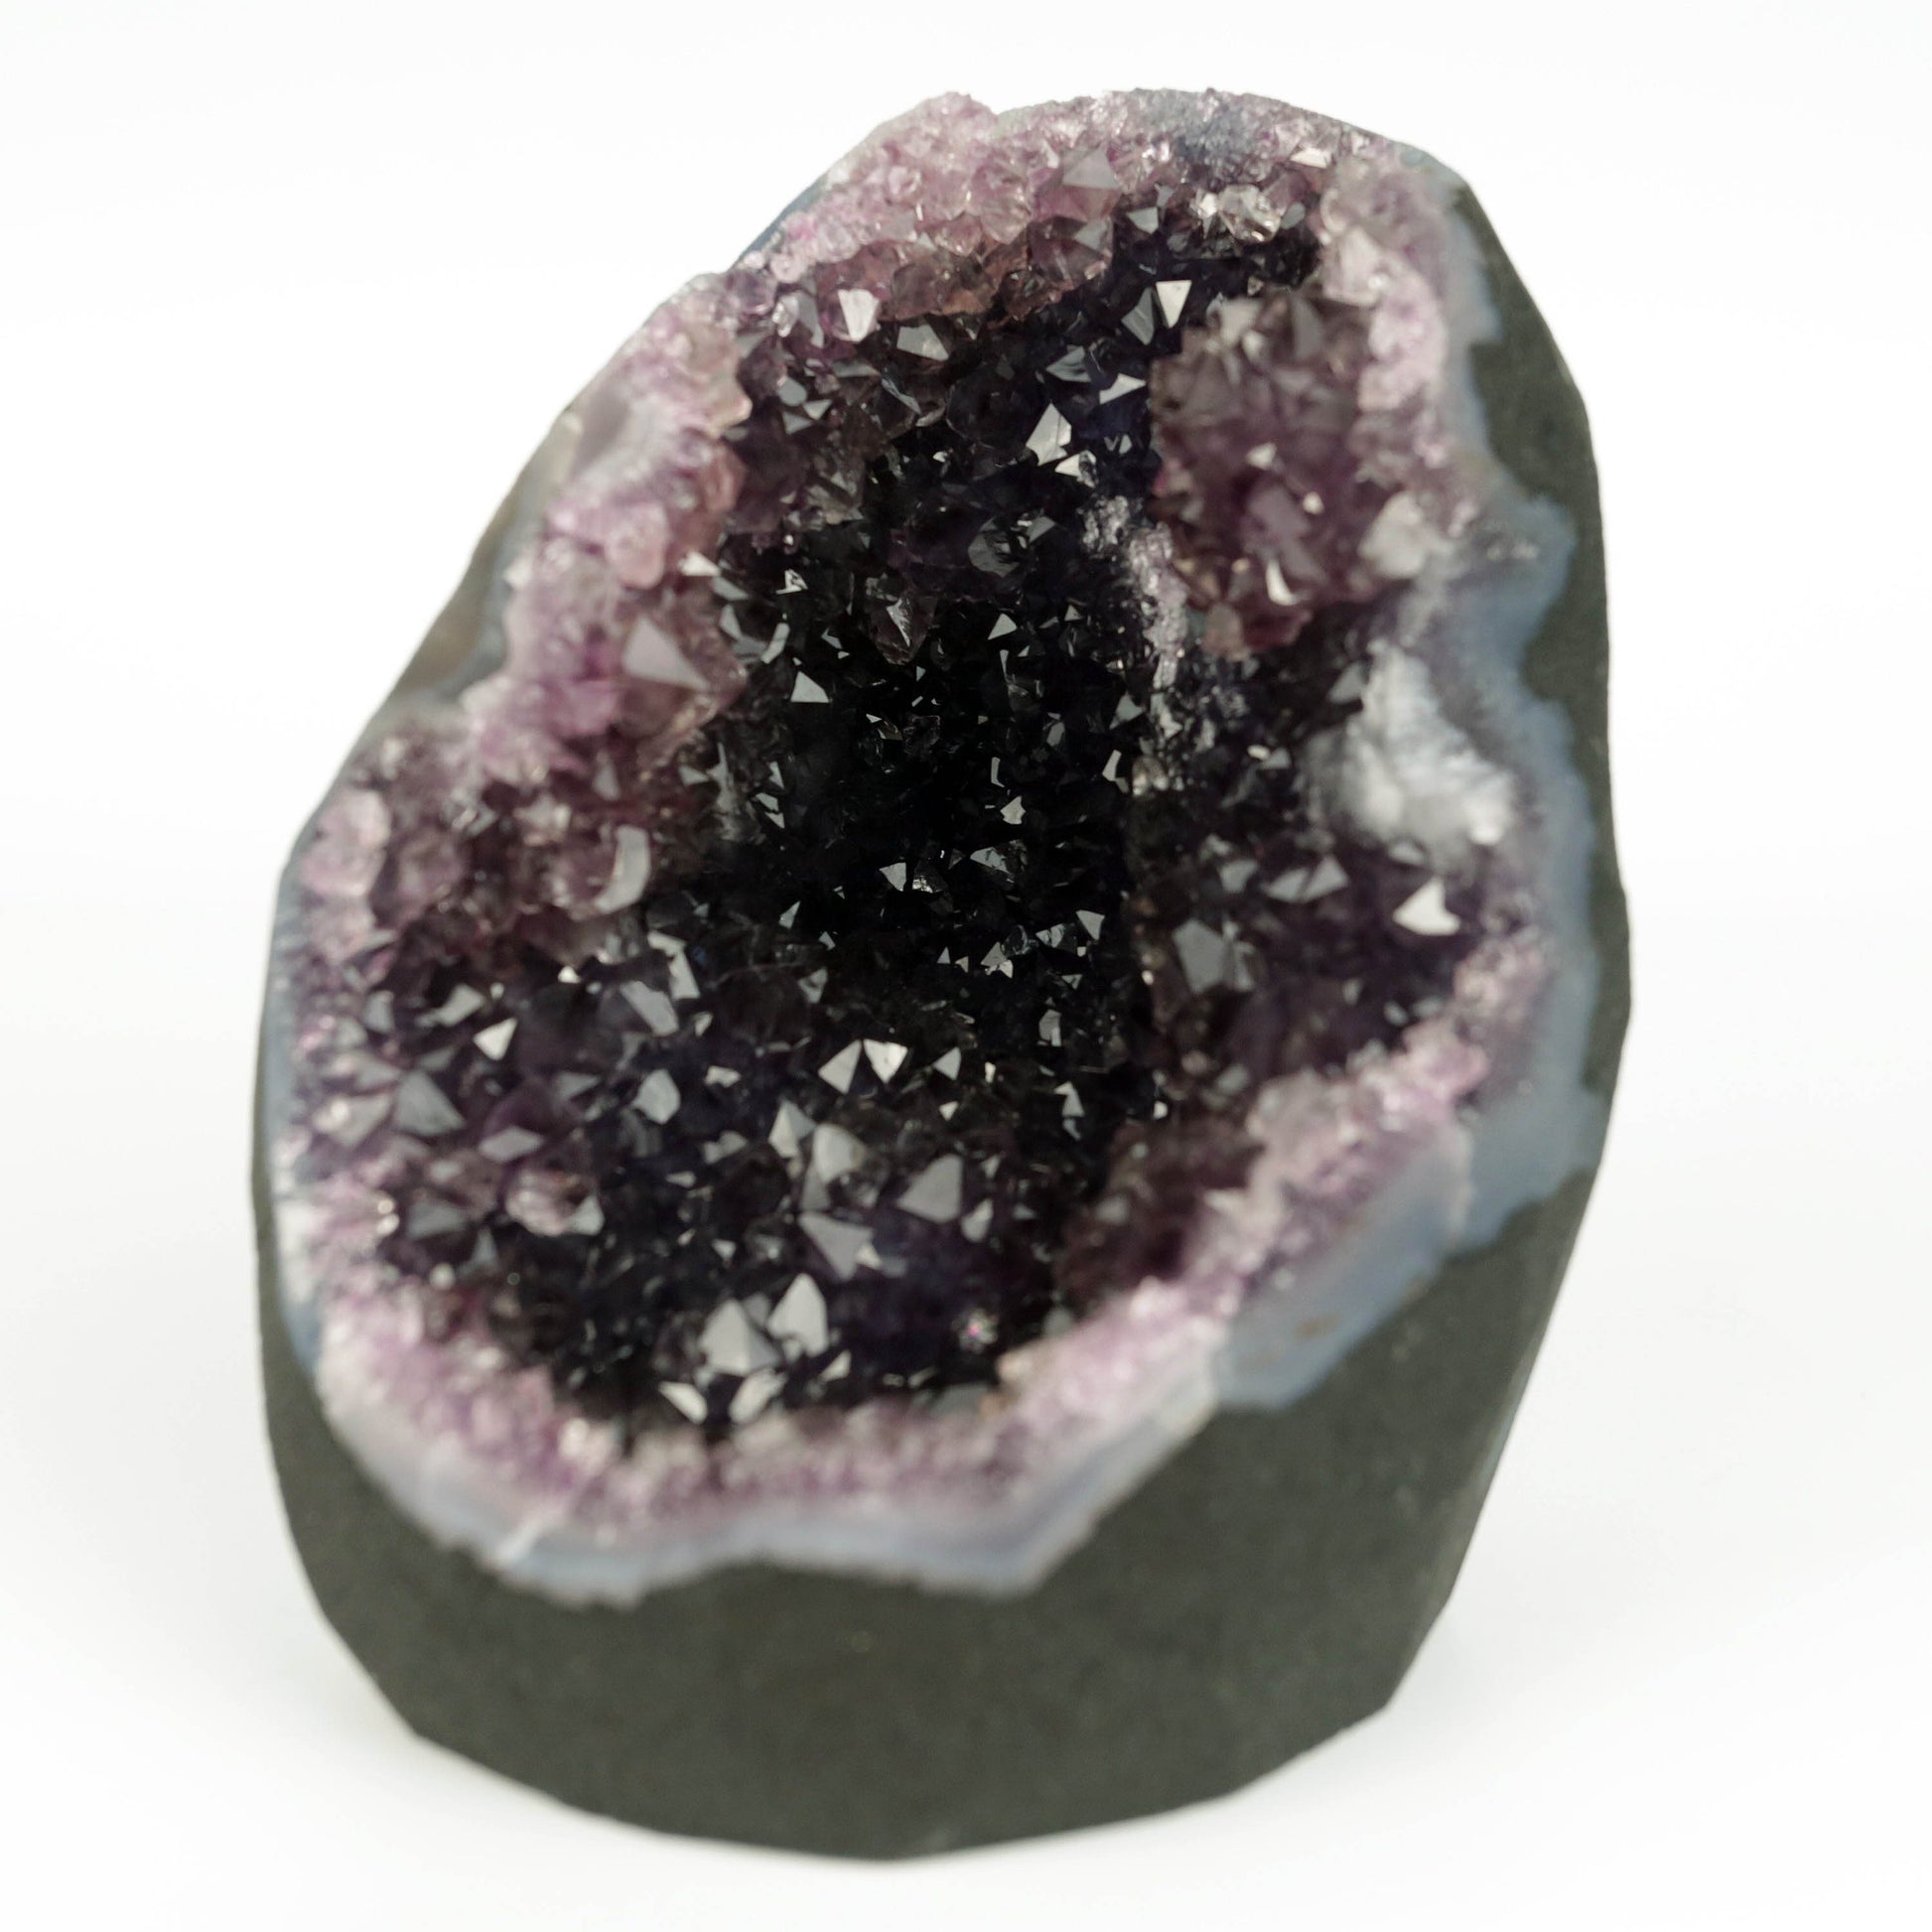 Amethyst Dark Purple Crystals Geode Natural Mineral Specimen # B 4645  https://www.superbminerals.us/products/amethyst-dark-purple-crystals-geode-natural-mineral-specimen-b-4645  Features: A Geode encrusted with beautiful, transparent Amethyst Quartz crystals in deep purple. Amethyst's vivid purple is unlike anything else on the market, and this piece is no exception. Aesthetic, with excellent colour and shine, and at a great price. It is in good shape. Primary Mineral(s): Amethyst